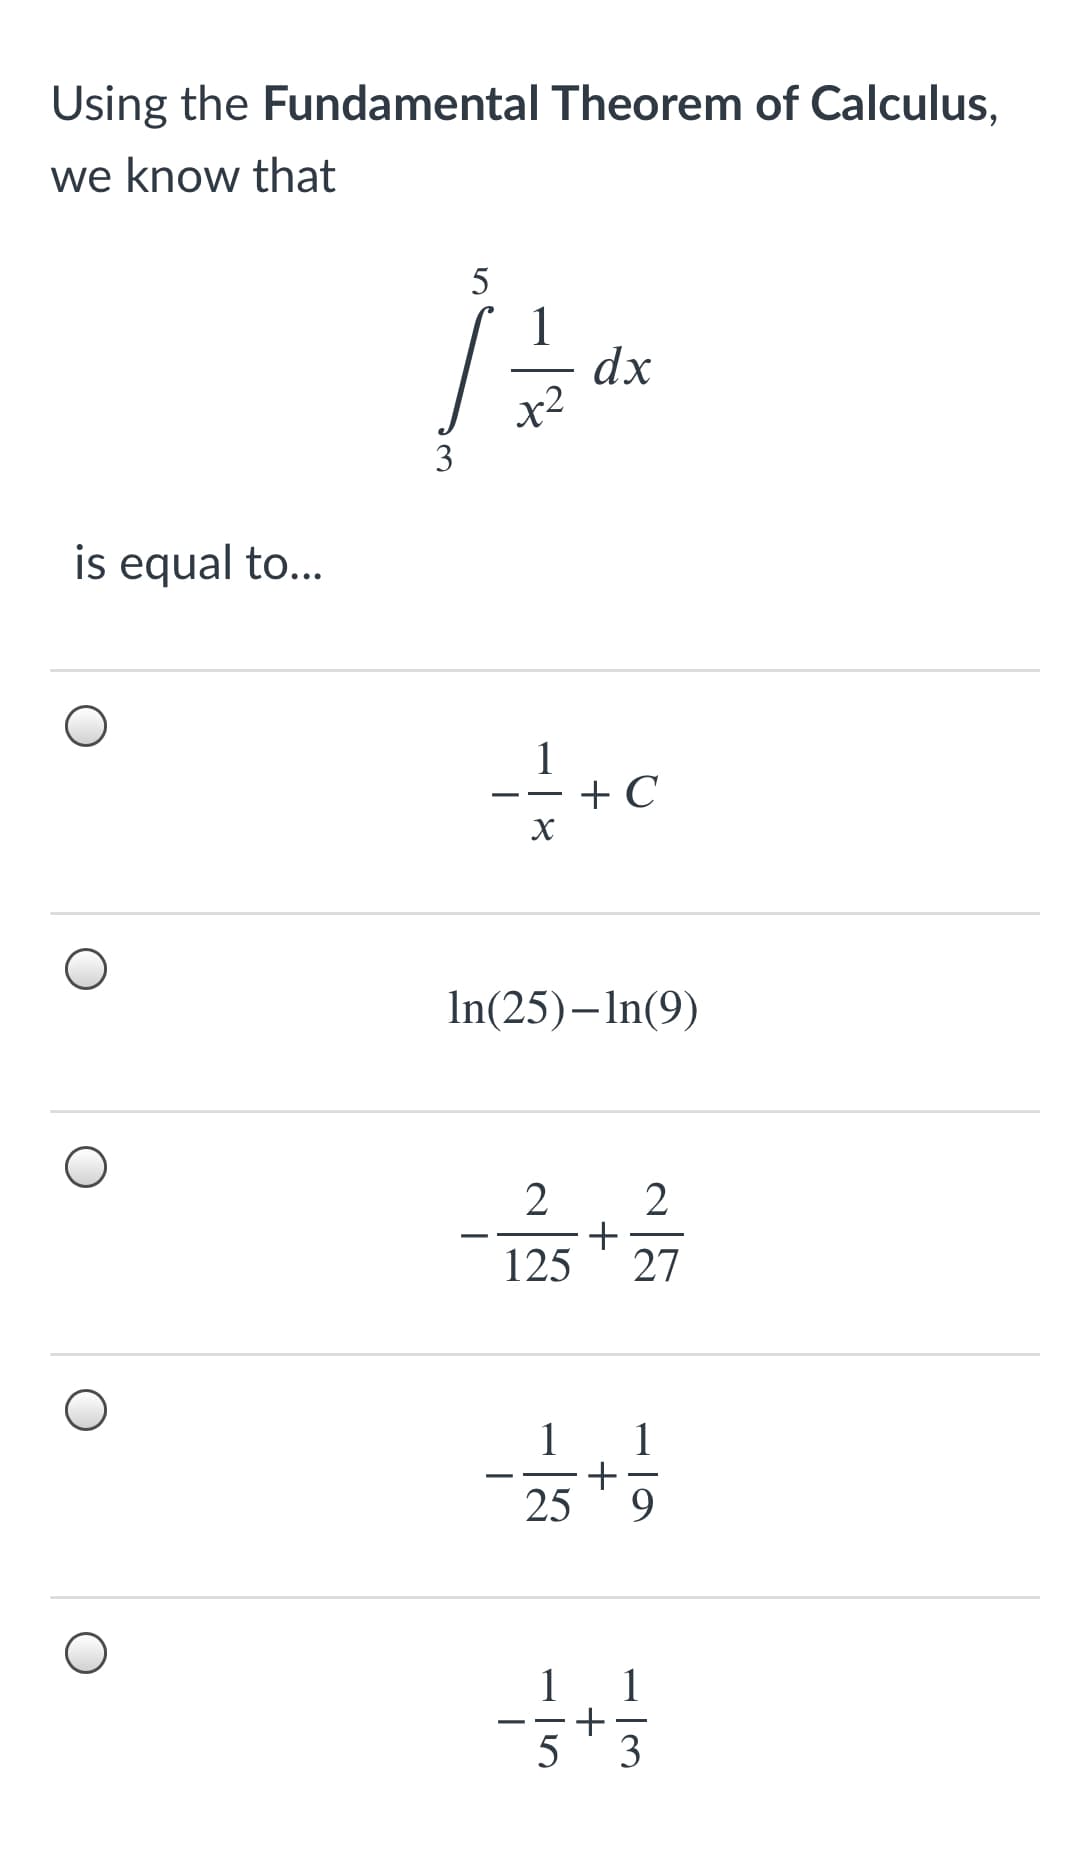 Using the Fundamental Theorem of Calculus,
we know that
1
dx
X2
3
is equal to...
1
+ C
In(25)–In(9)
2
+
125
27
1
1
25
9.
1 1
5
3
+
+
